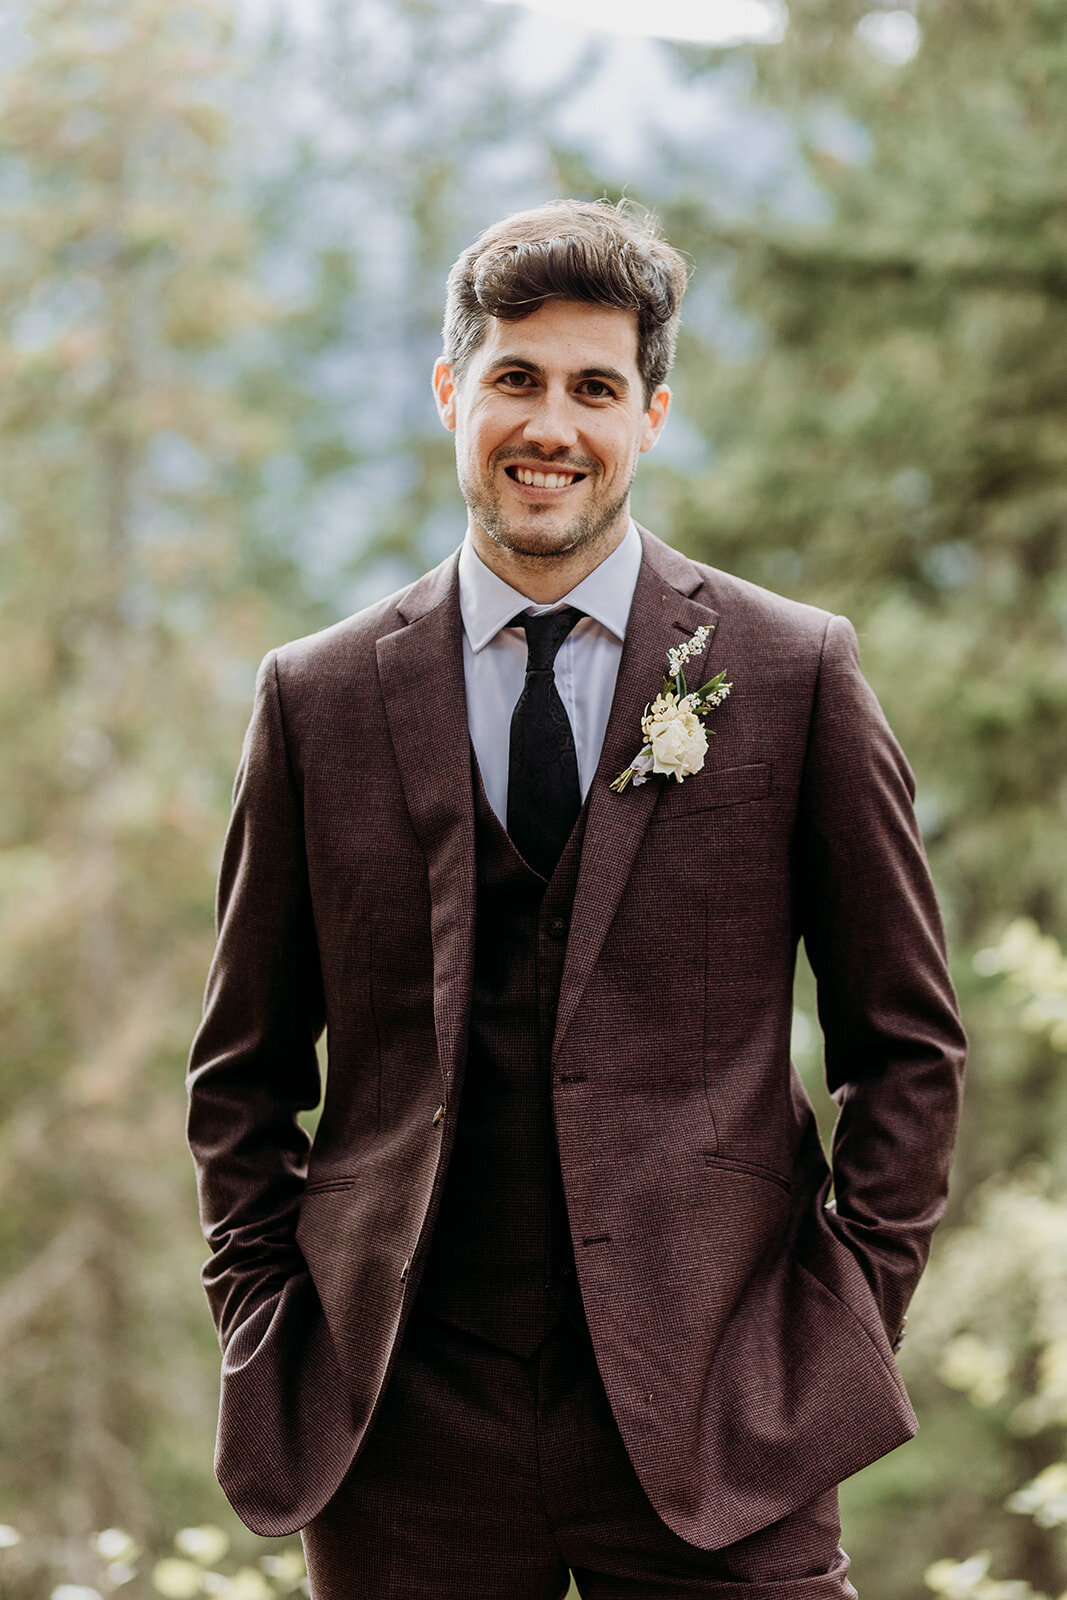 Groom with boutonniere Pemberton wedding - Within the Flowers